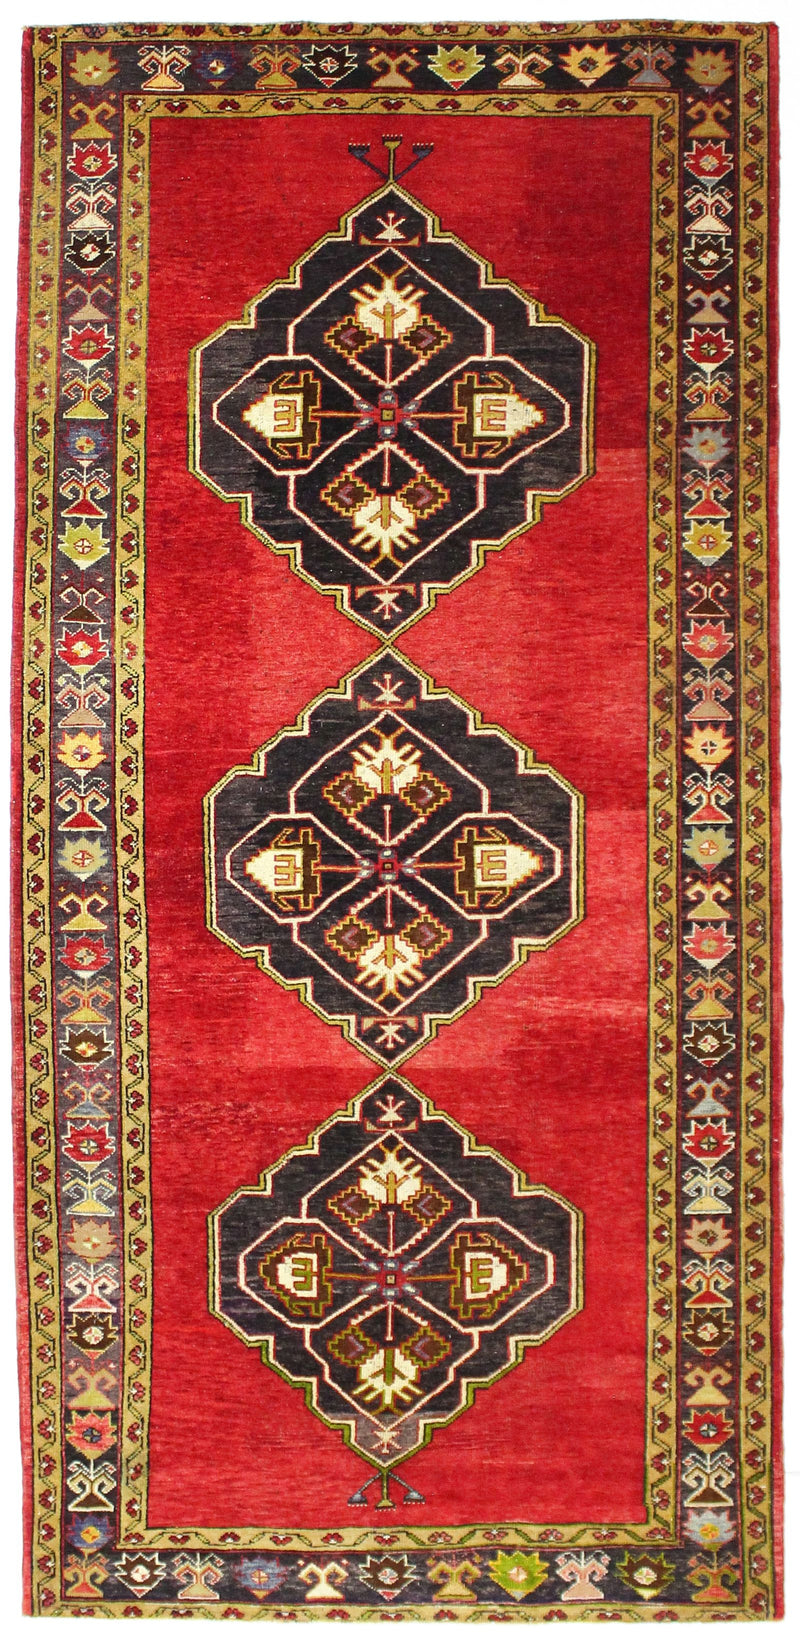 5x11 Red and Multicolor Turkish Tribal Runner